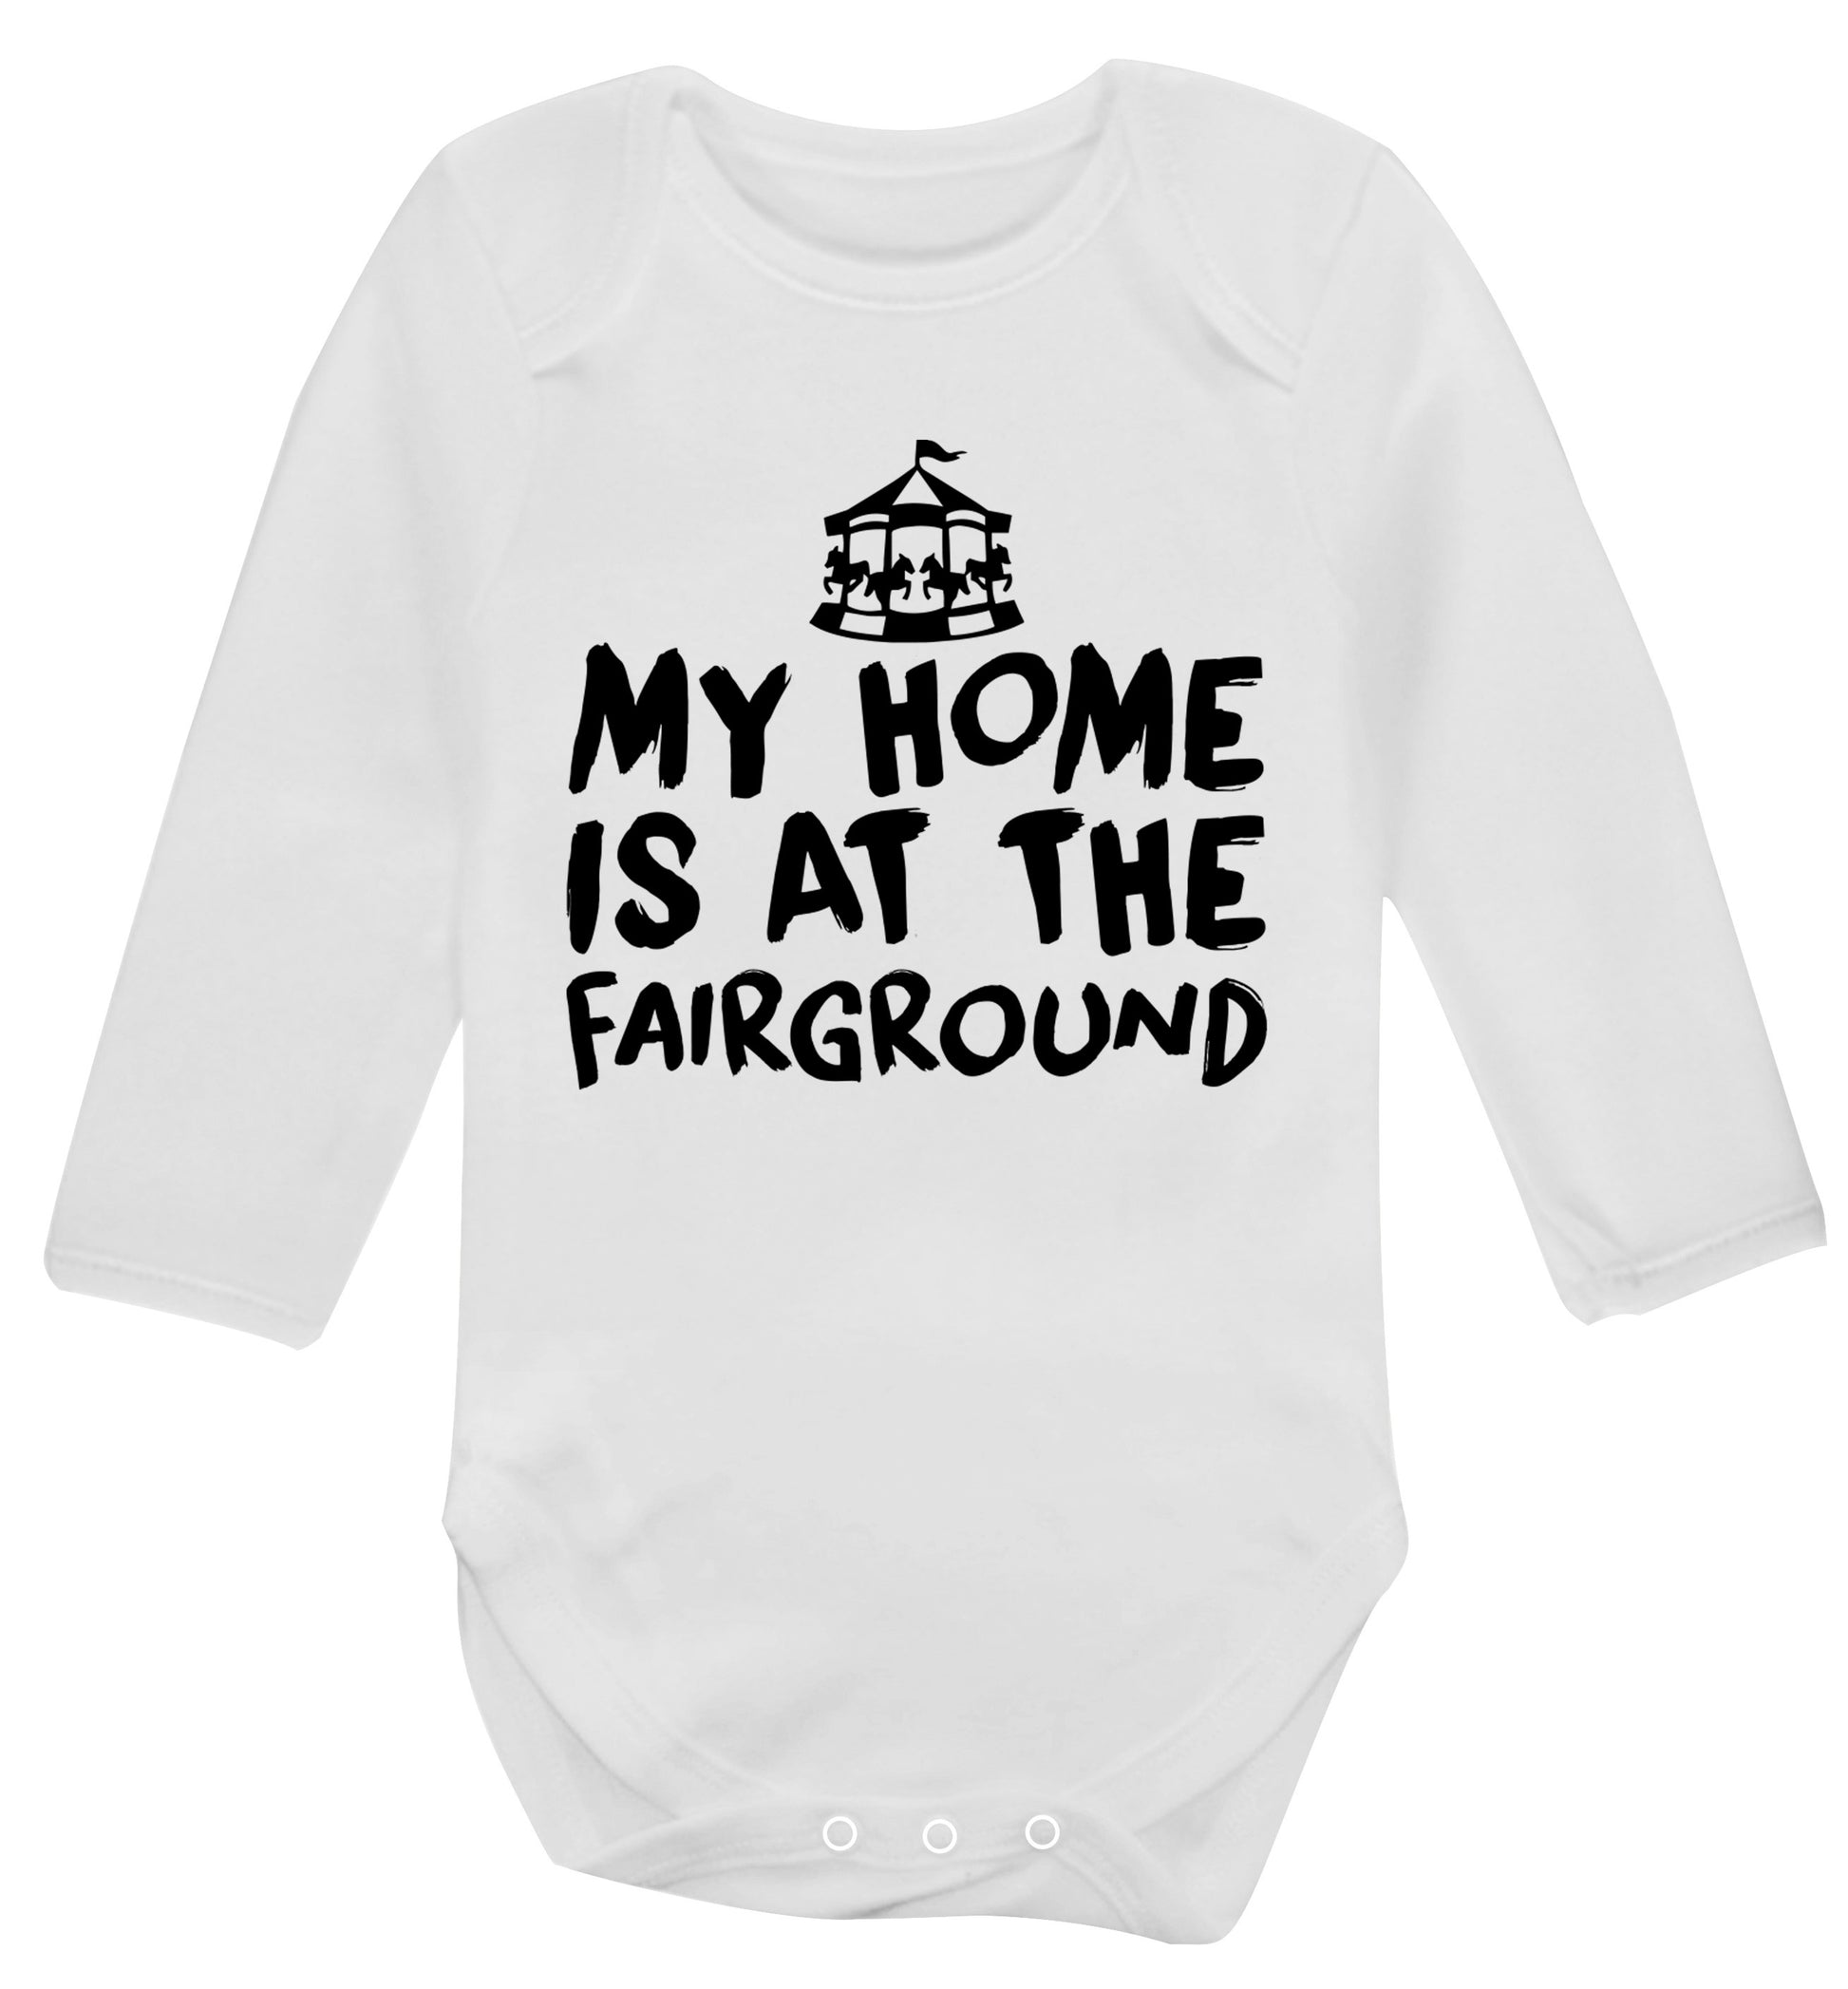 My home is at the fairground Baby Vest long sleeved white 6-12 months